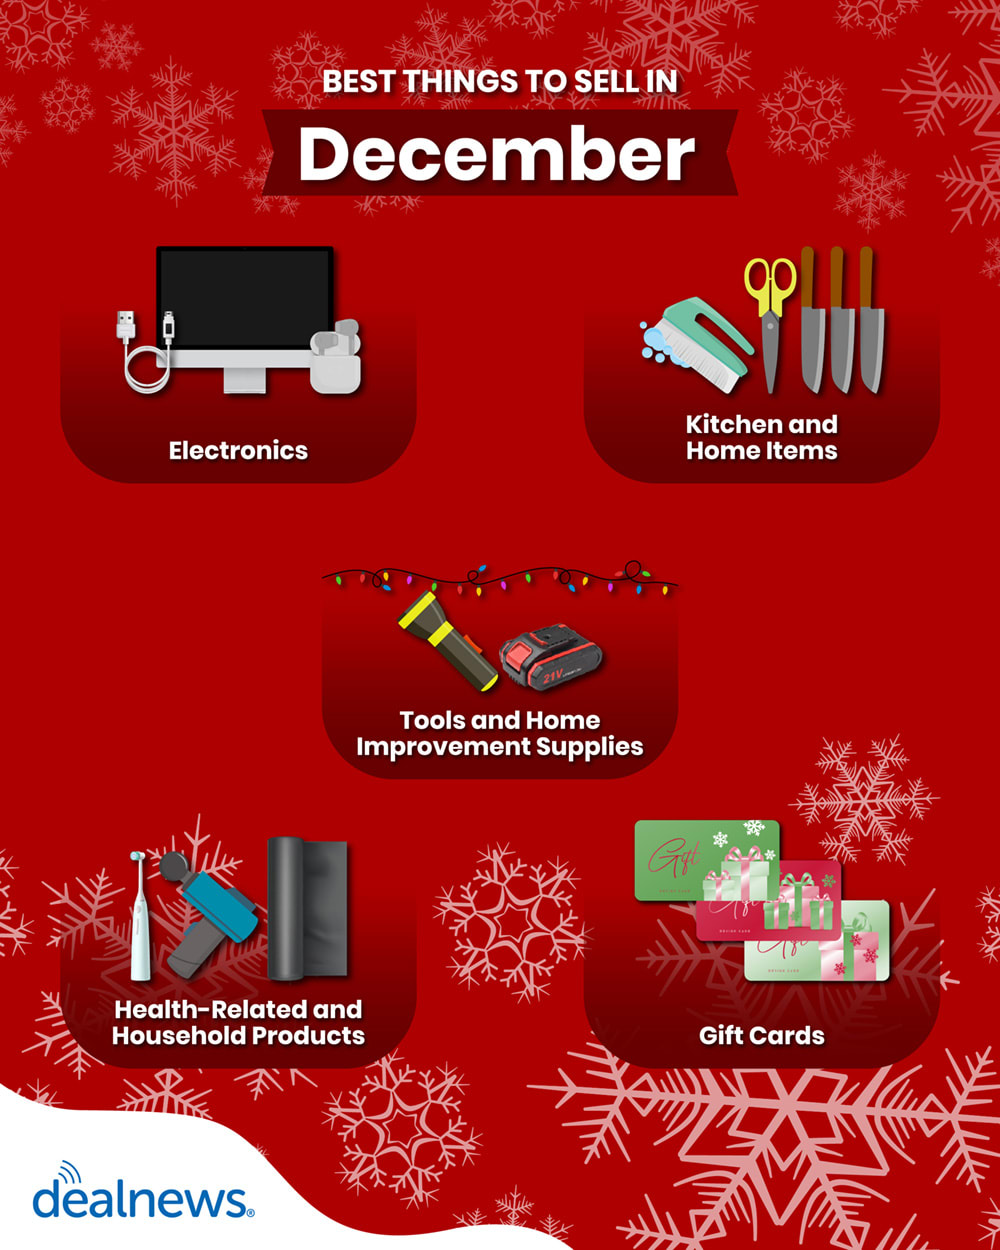 https://c.dlnws.com/image/upload/c_limit,f_auto,q_auto,w_1800/v1702683873/Blog%20Infographics/DN-what-to-sell-in-December-2023.jpg